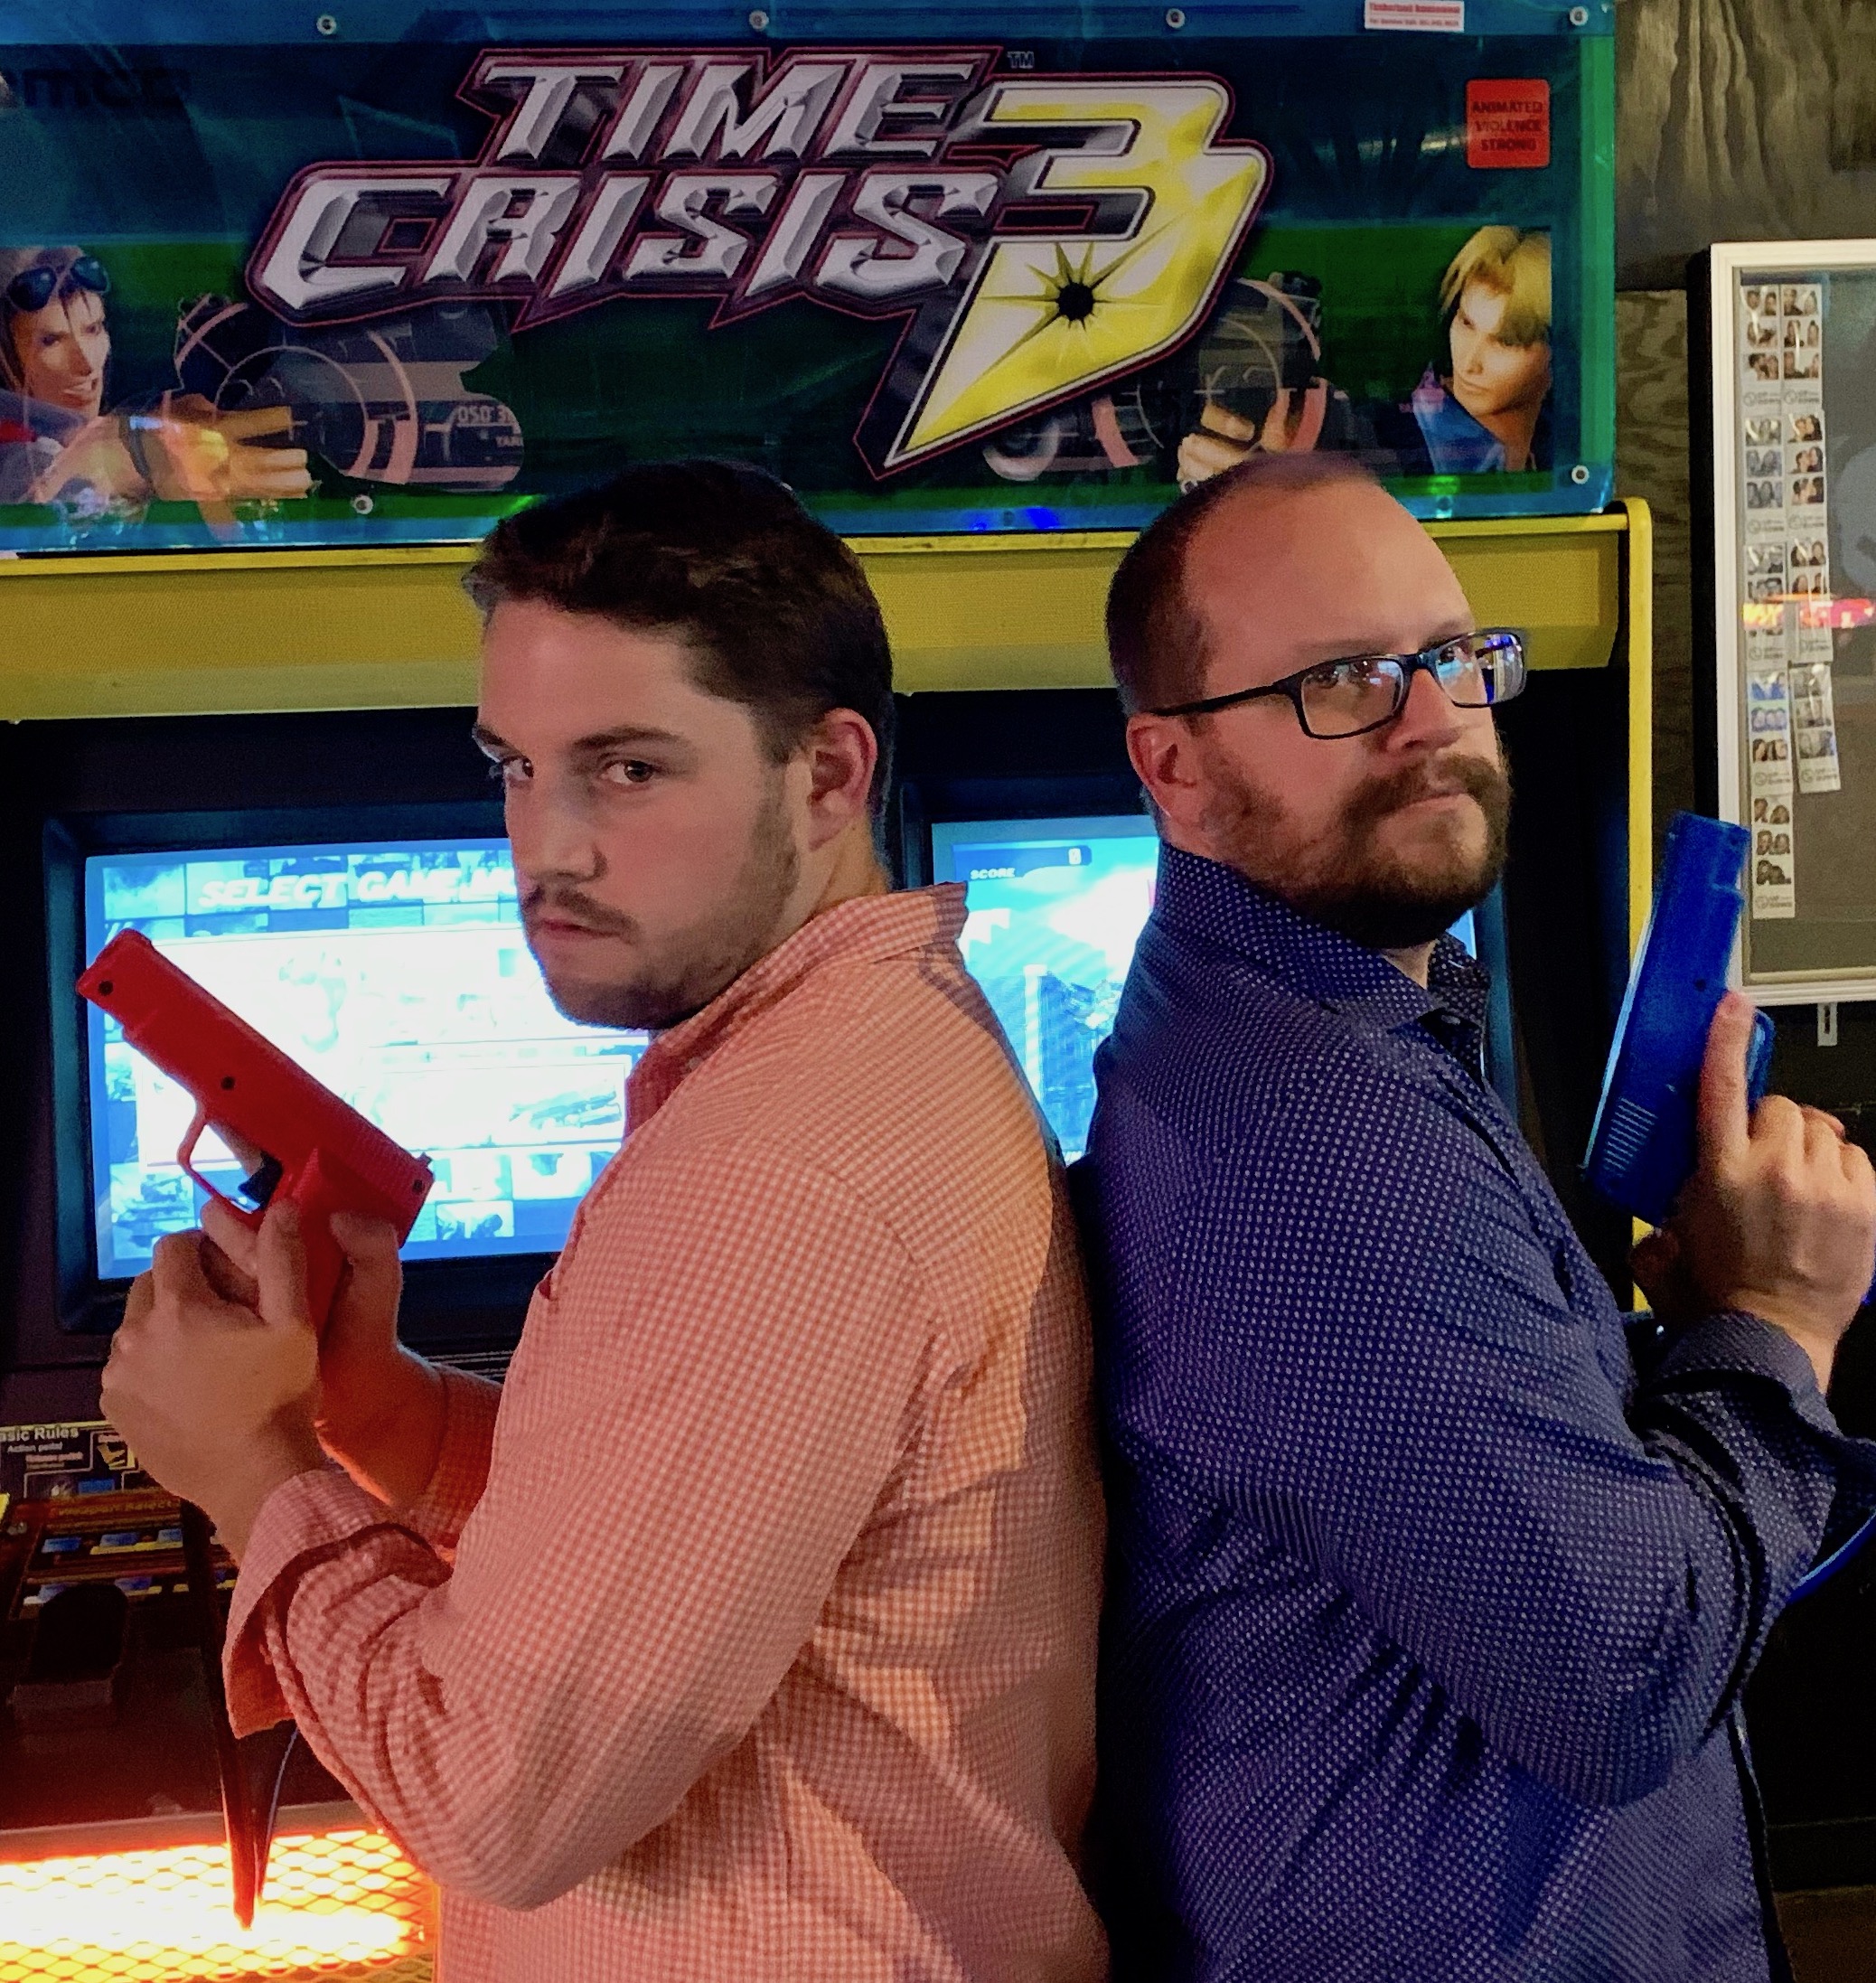 Handsome echogear employees play Time Crisis 3 at Up-Down Minneapolis